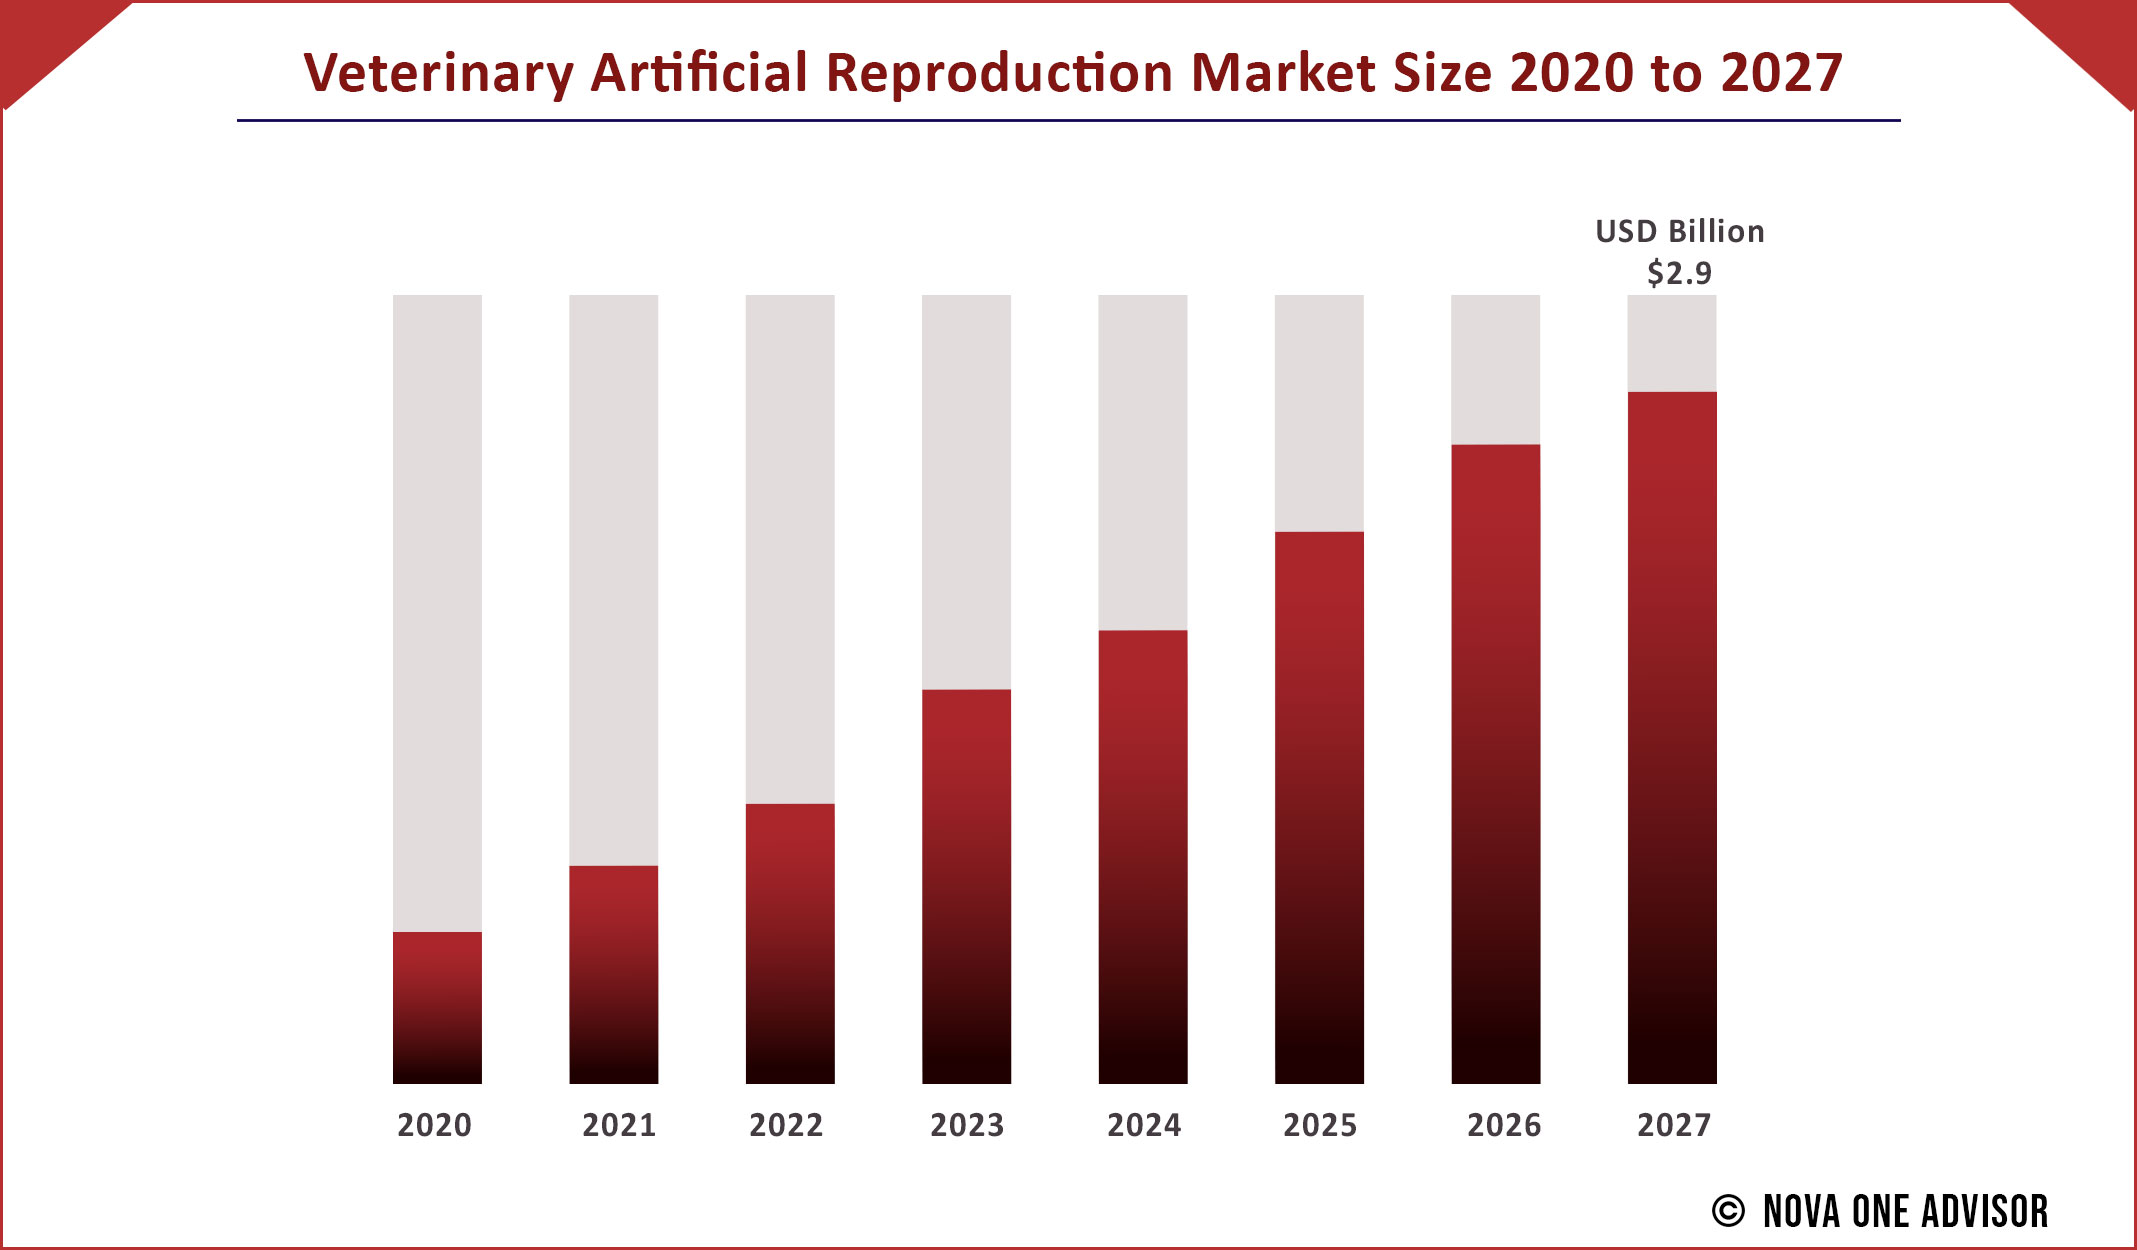 Veterinary Artificial Reproduction Market Size 2020 to 2027